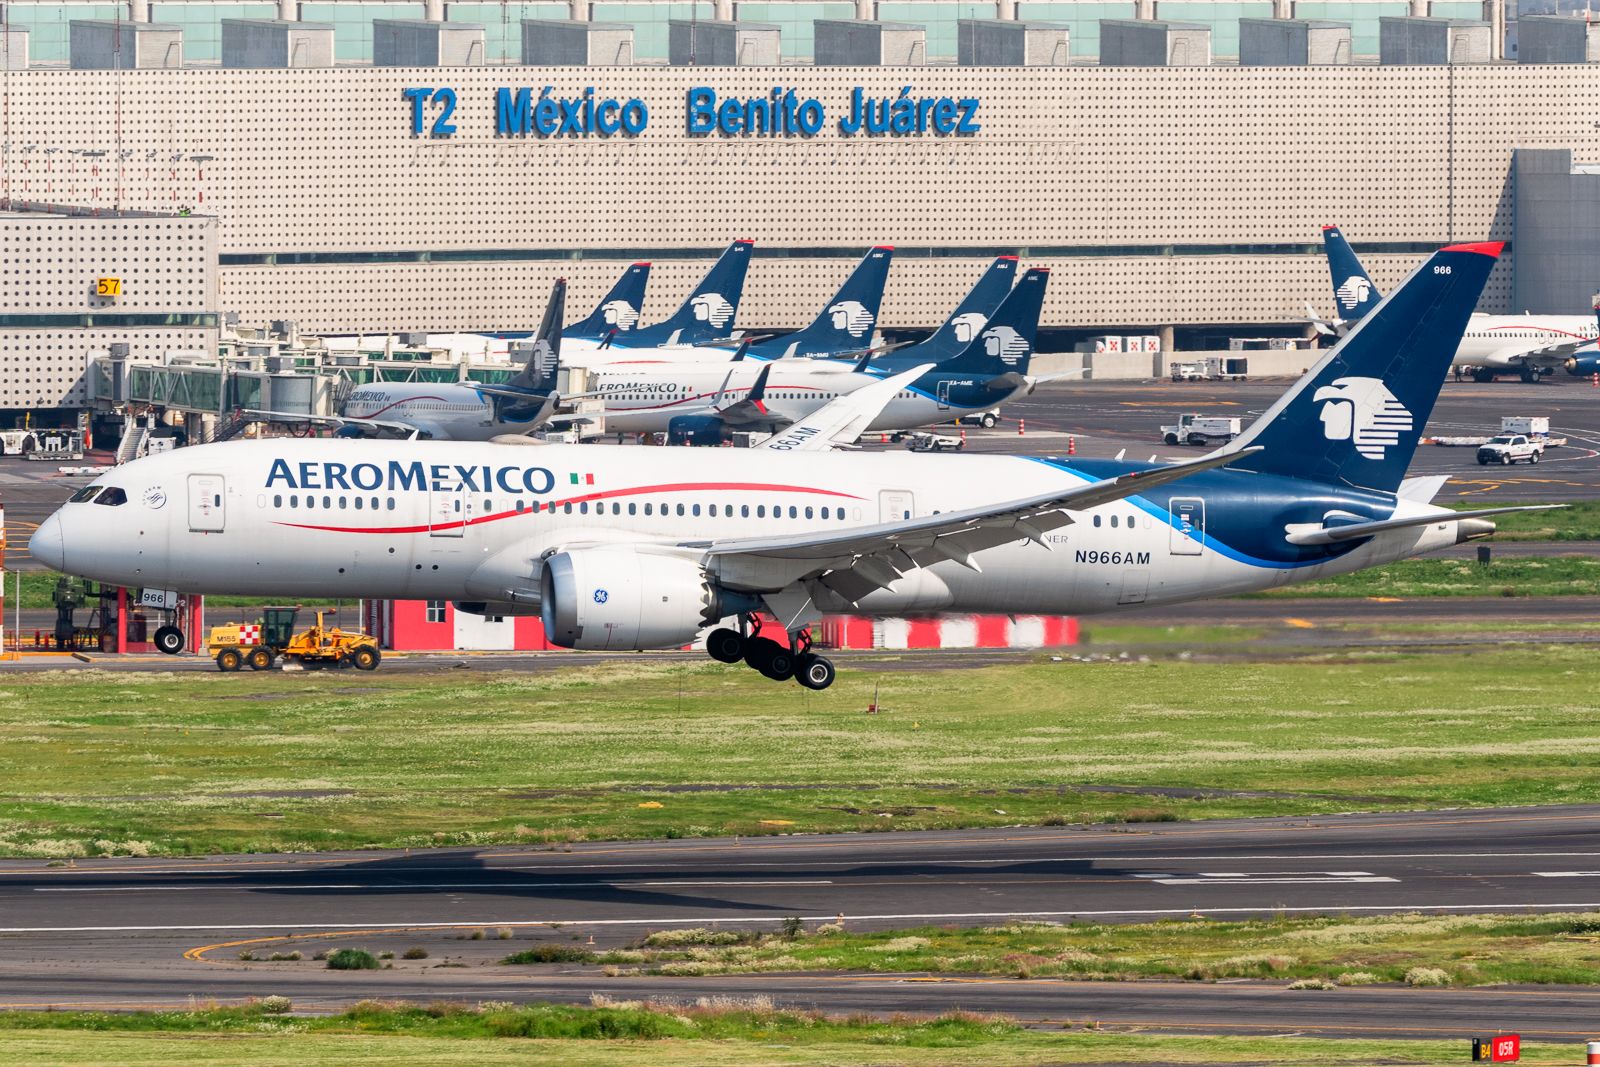 An Aeromexico Boeing 787-8 Dreamliner landing in Mexico City.